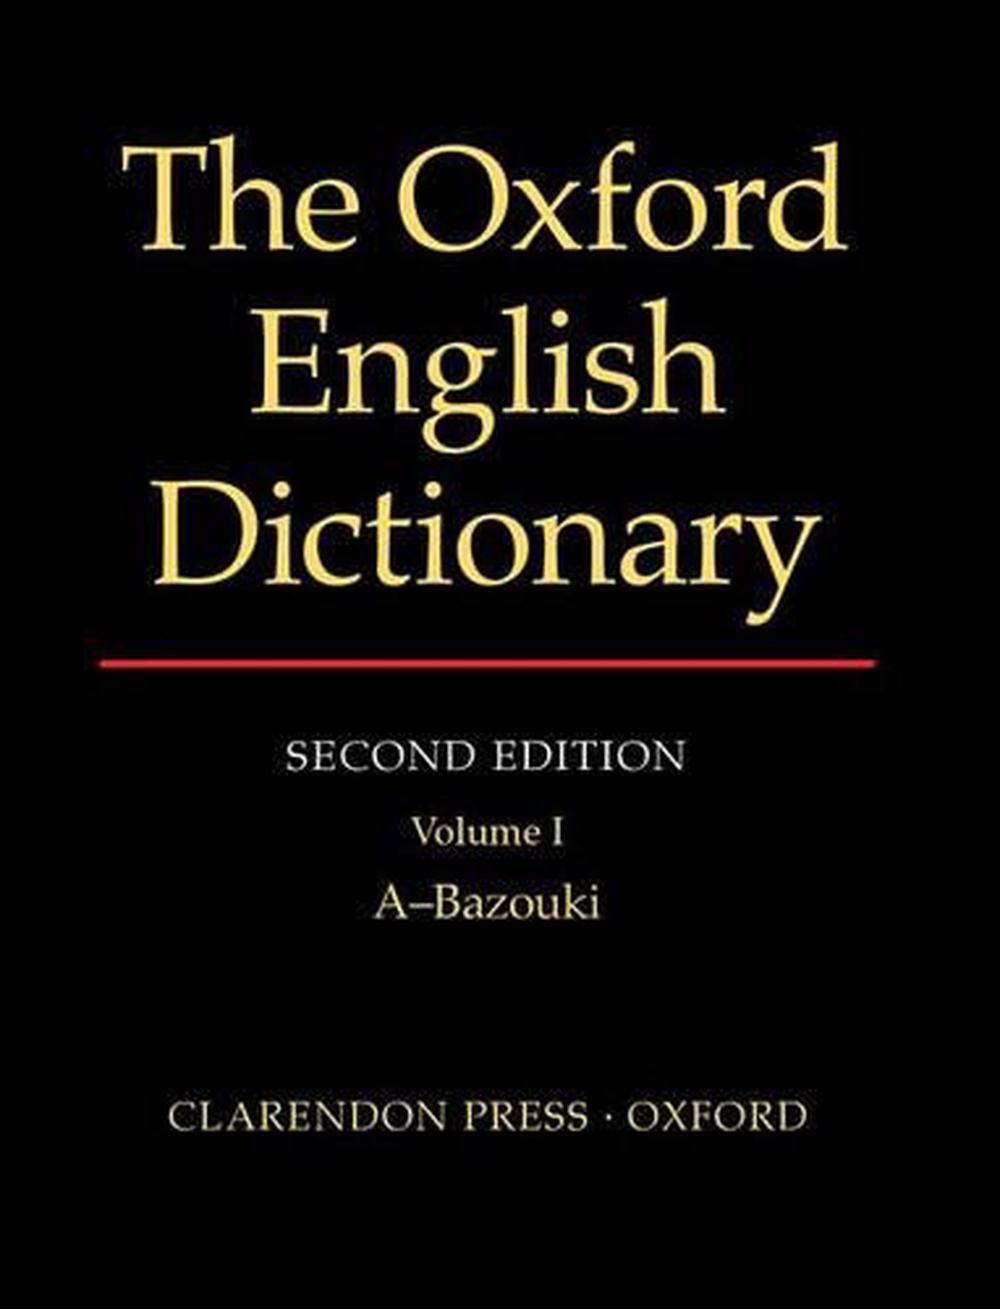 The Oxford English Dictionary 20 Volume Set by J.A. Simpson, Hardcover